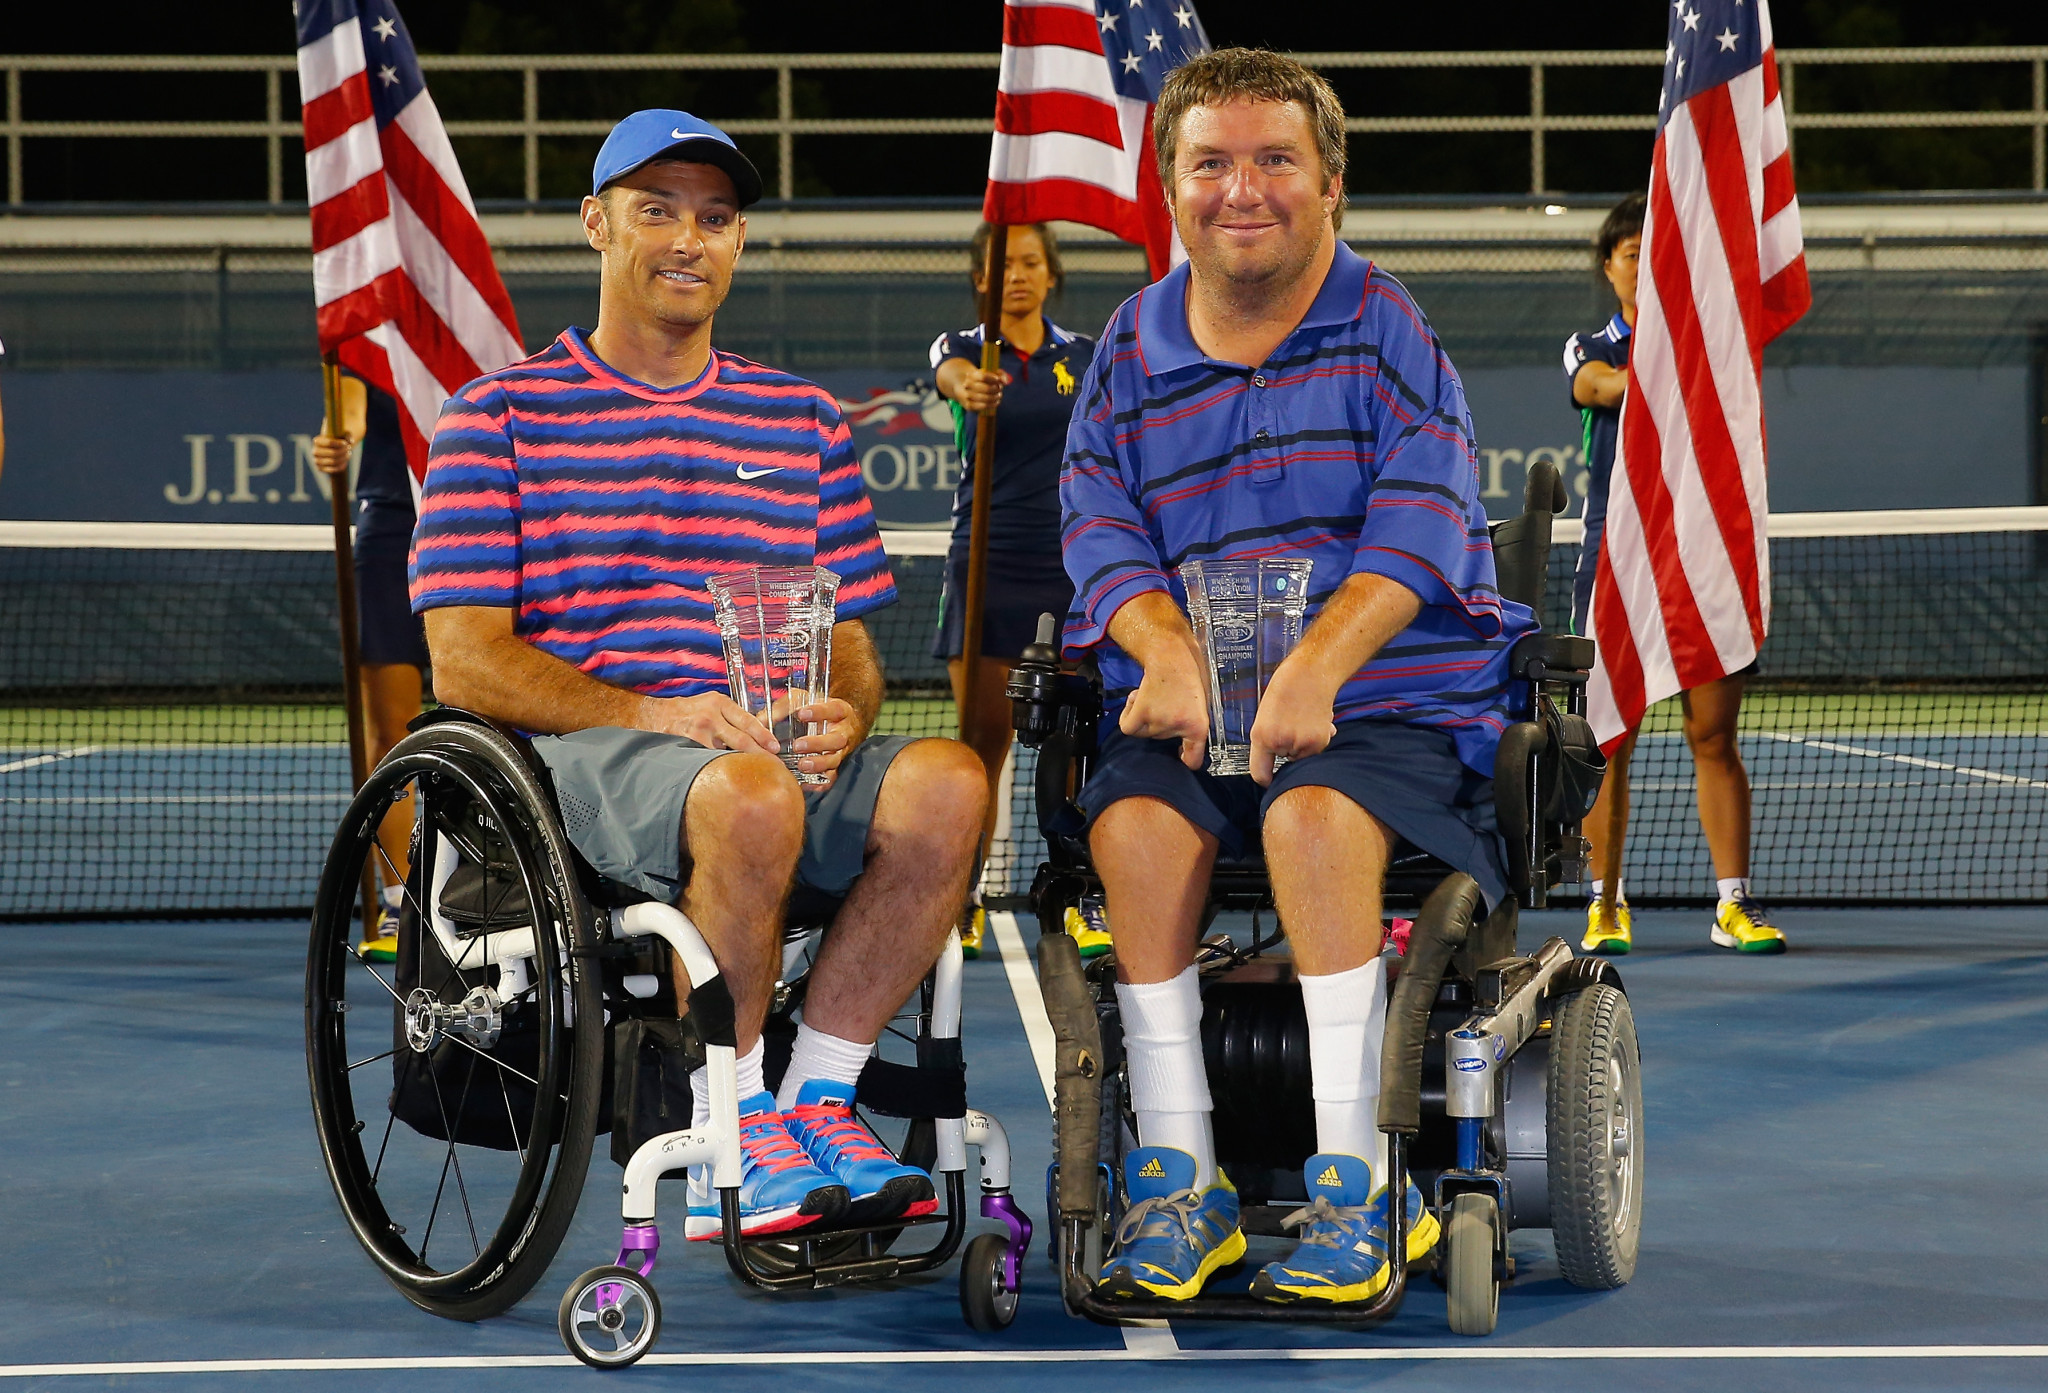 Nicholas Taylor and David Wagner have won the quads title at the Wheelchair Doubles Masters in The Netherlands today ©Getty Images